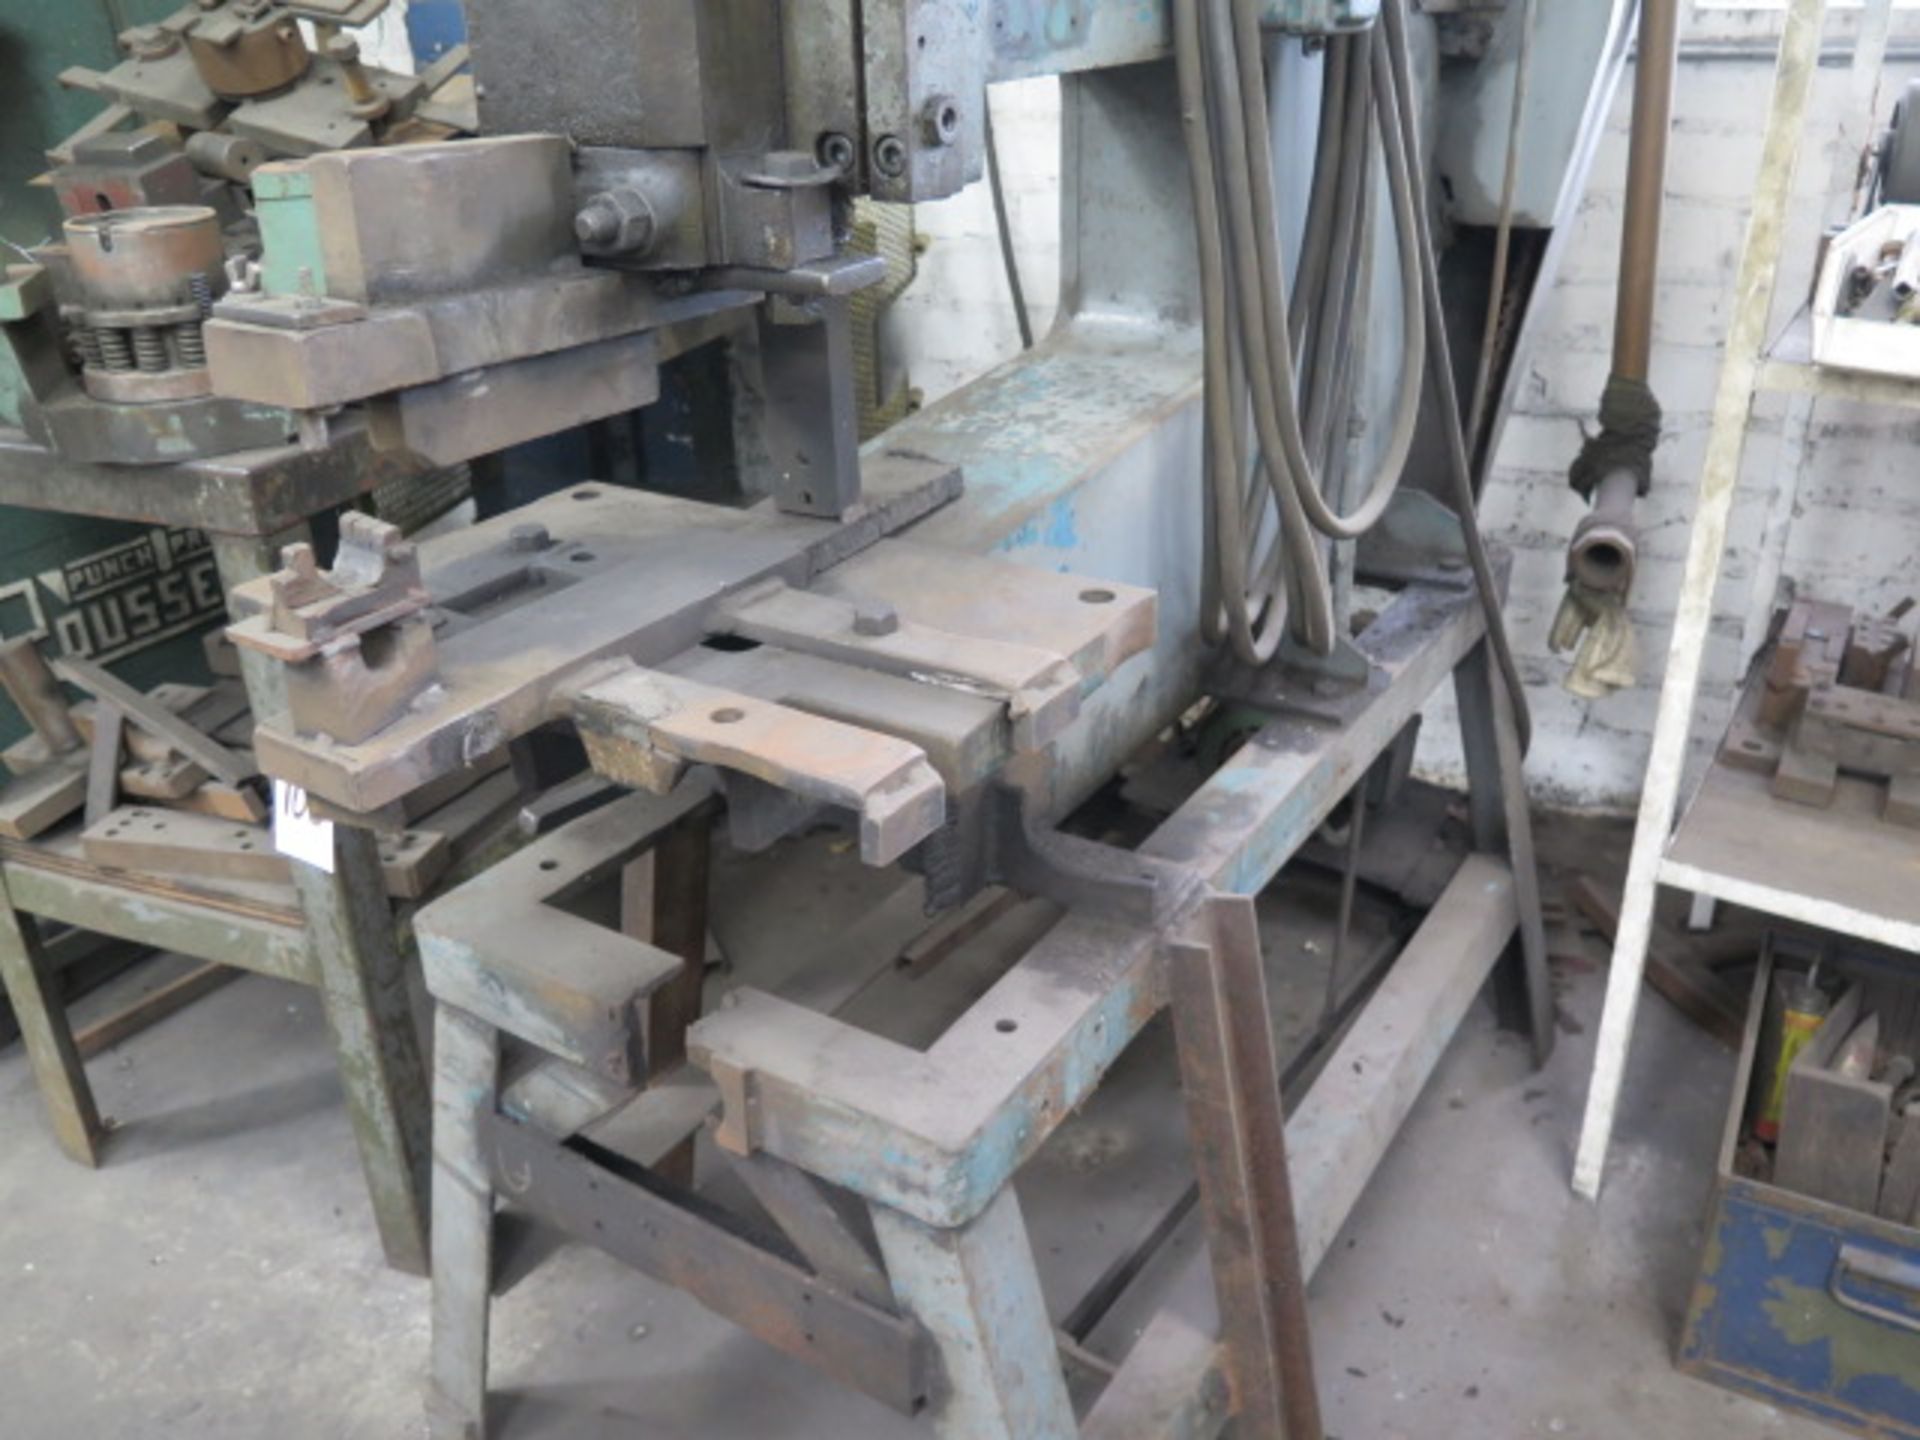 Whitney-Jensen mdl. 231 Punch Press s/n 367-7-62 (FOR PARTS ONLY) (SOLD AS-IS - NO WARRANTY - Image 4 of 6